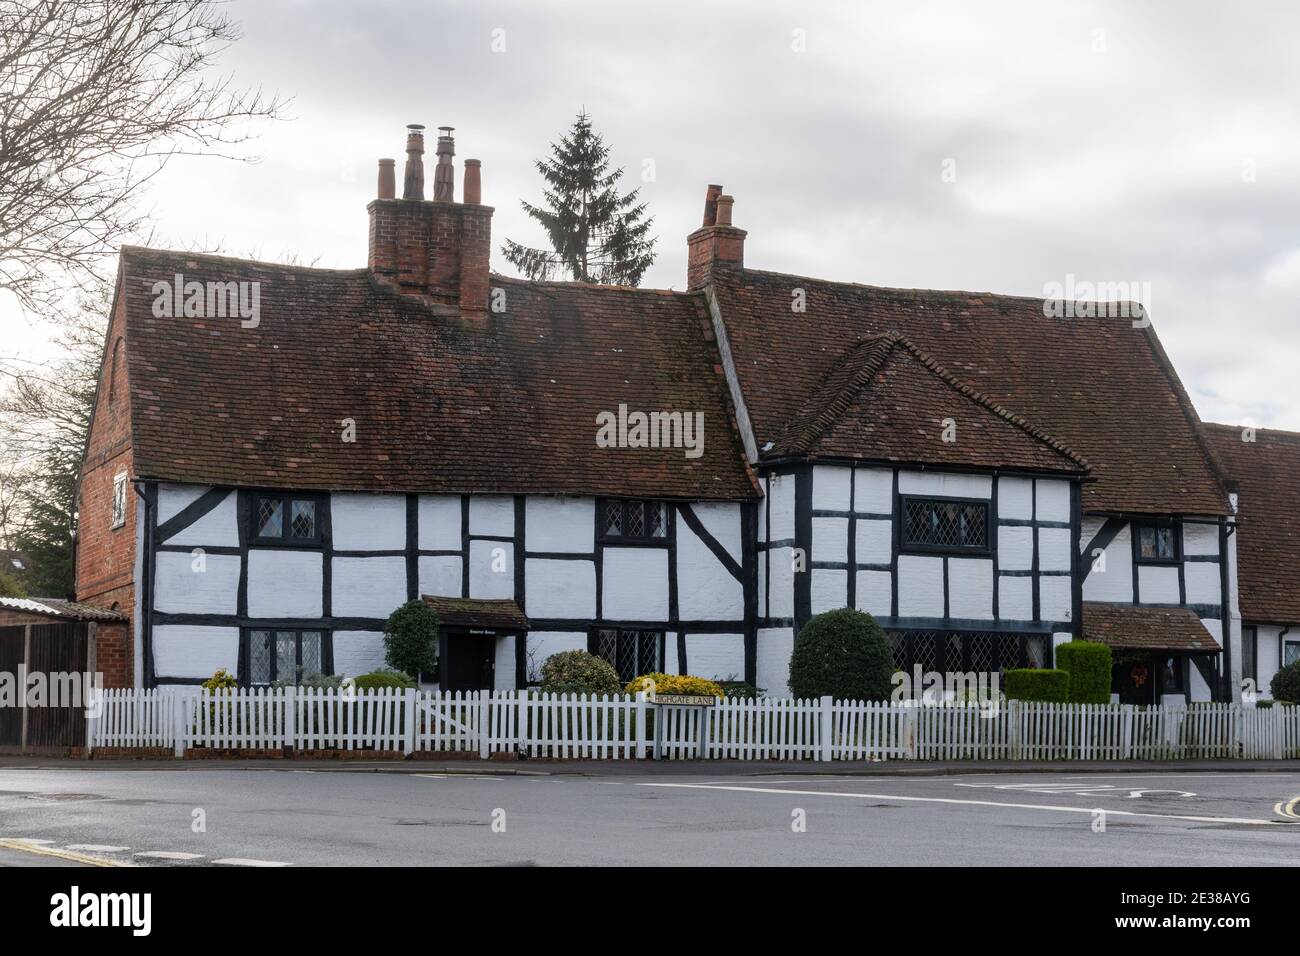 Emperor House, historic Grade II listed timber framed building in Farnborough, Hampshire, UK Stock Photo